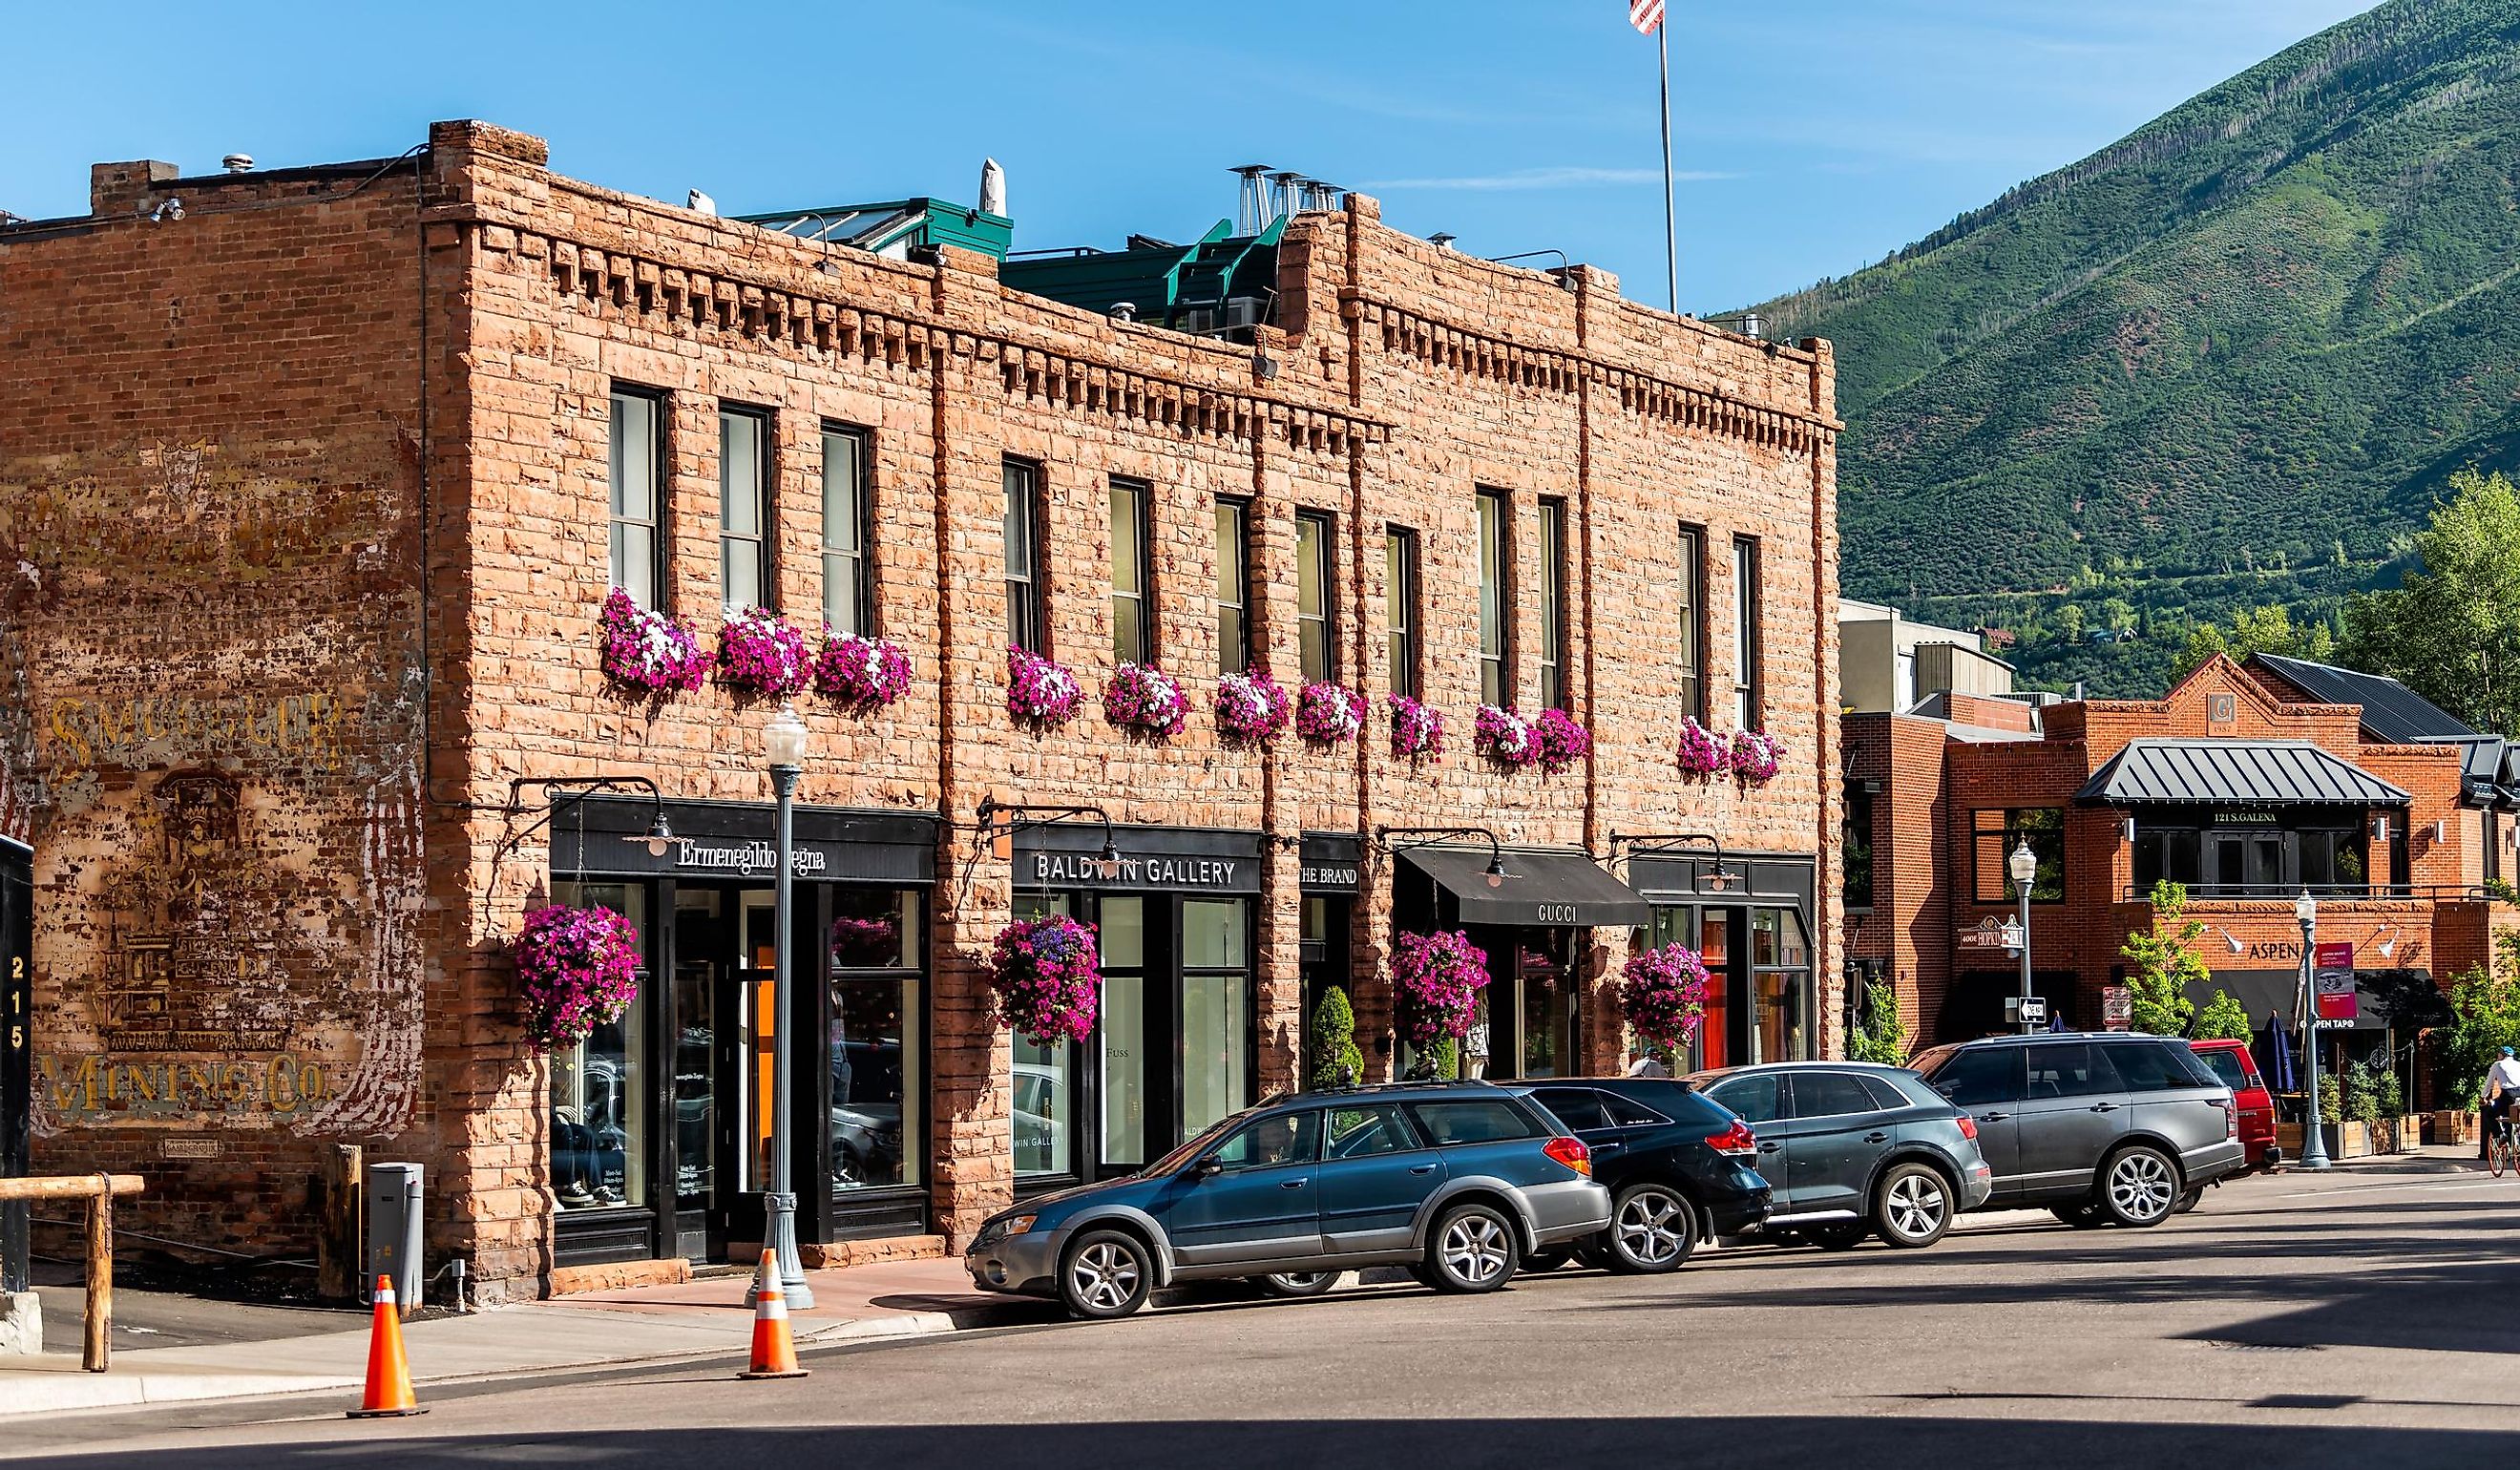 Historic downtown outdoor summer street in Colorado with brick architecture and flower decorations. Editorial Credit: Kristi Blokhin / Shutterstock.com